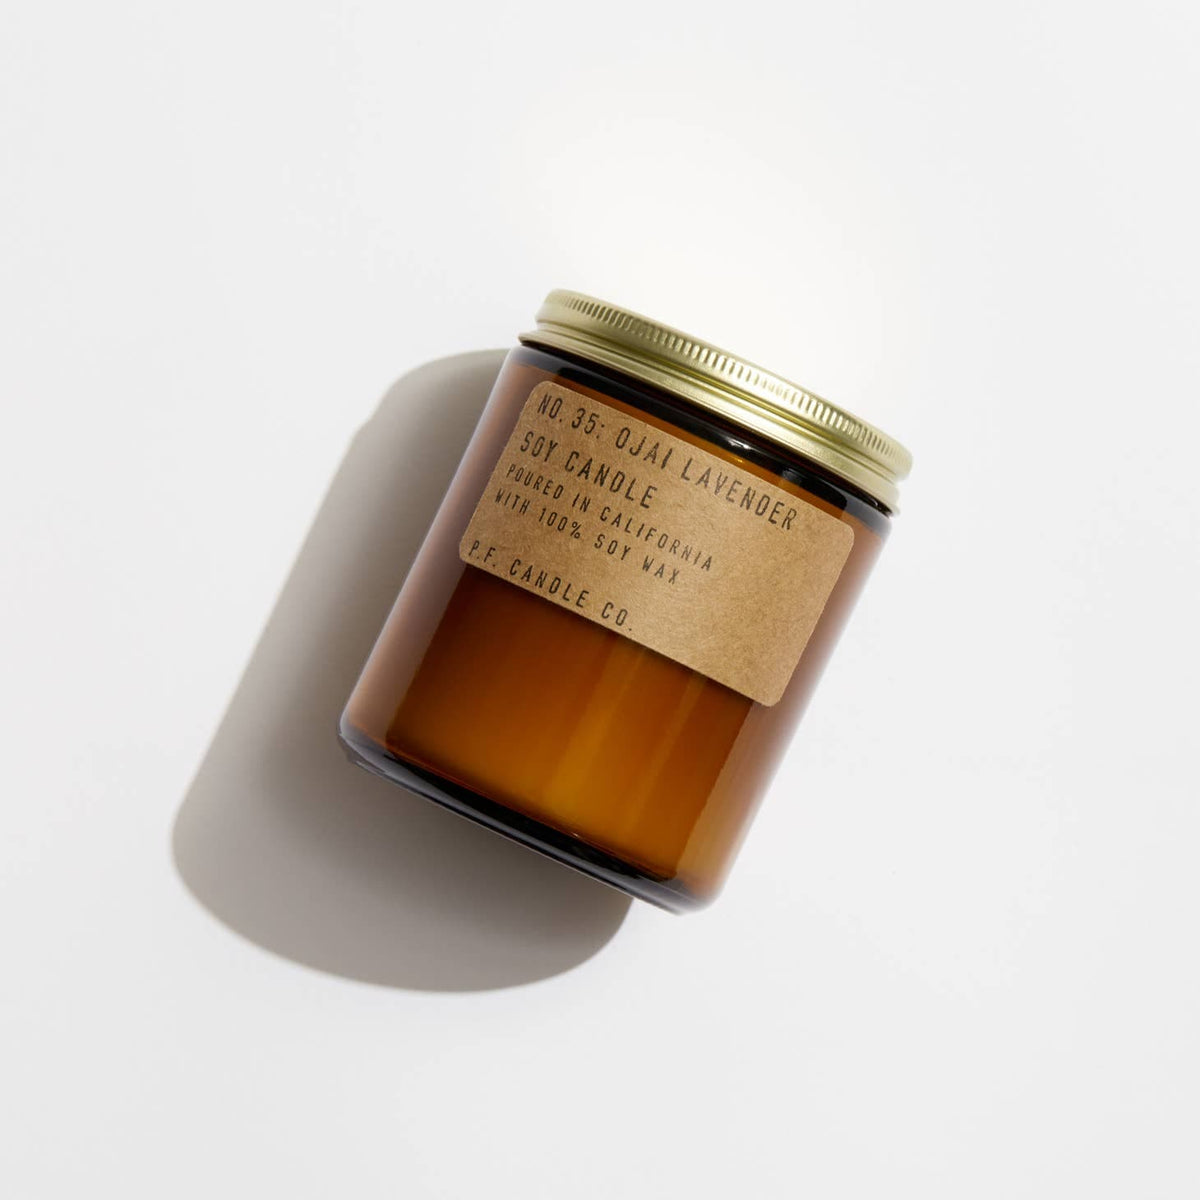 P.F. Candle Co Ojai Lavender Soy Candle